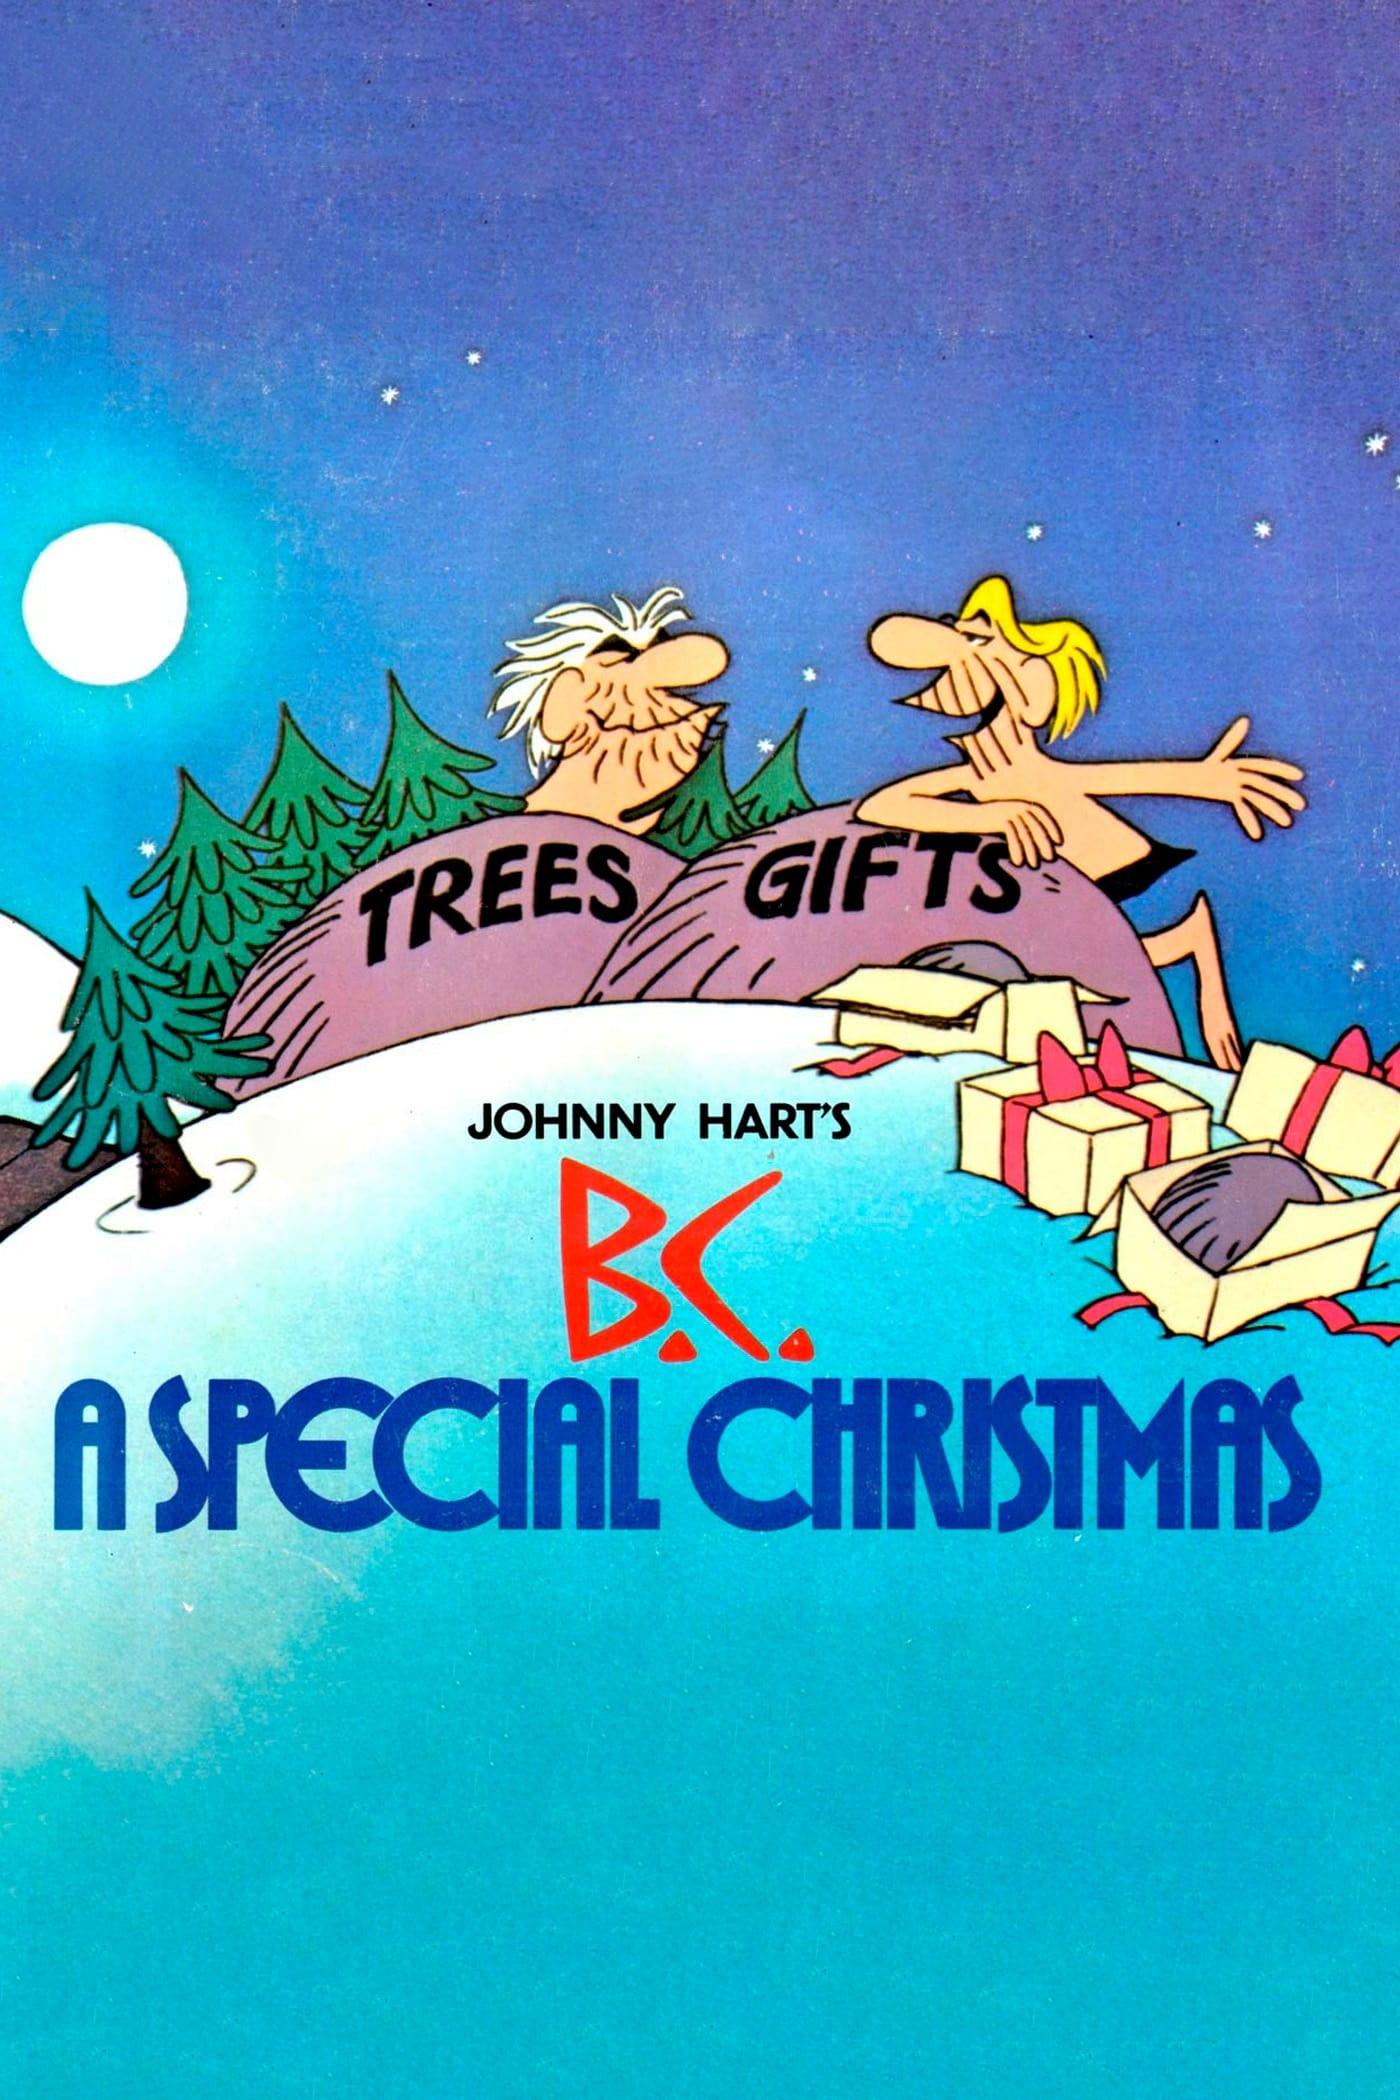 B.C. A Special Christmas poster